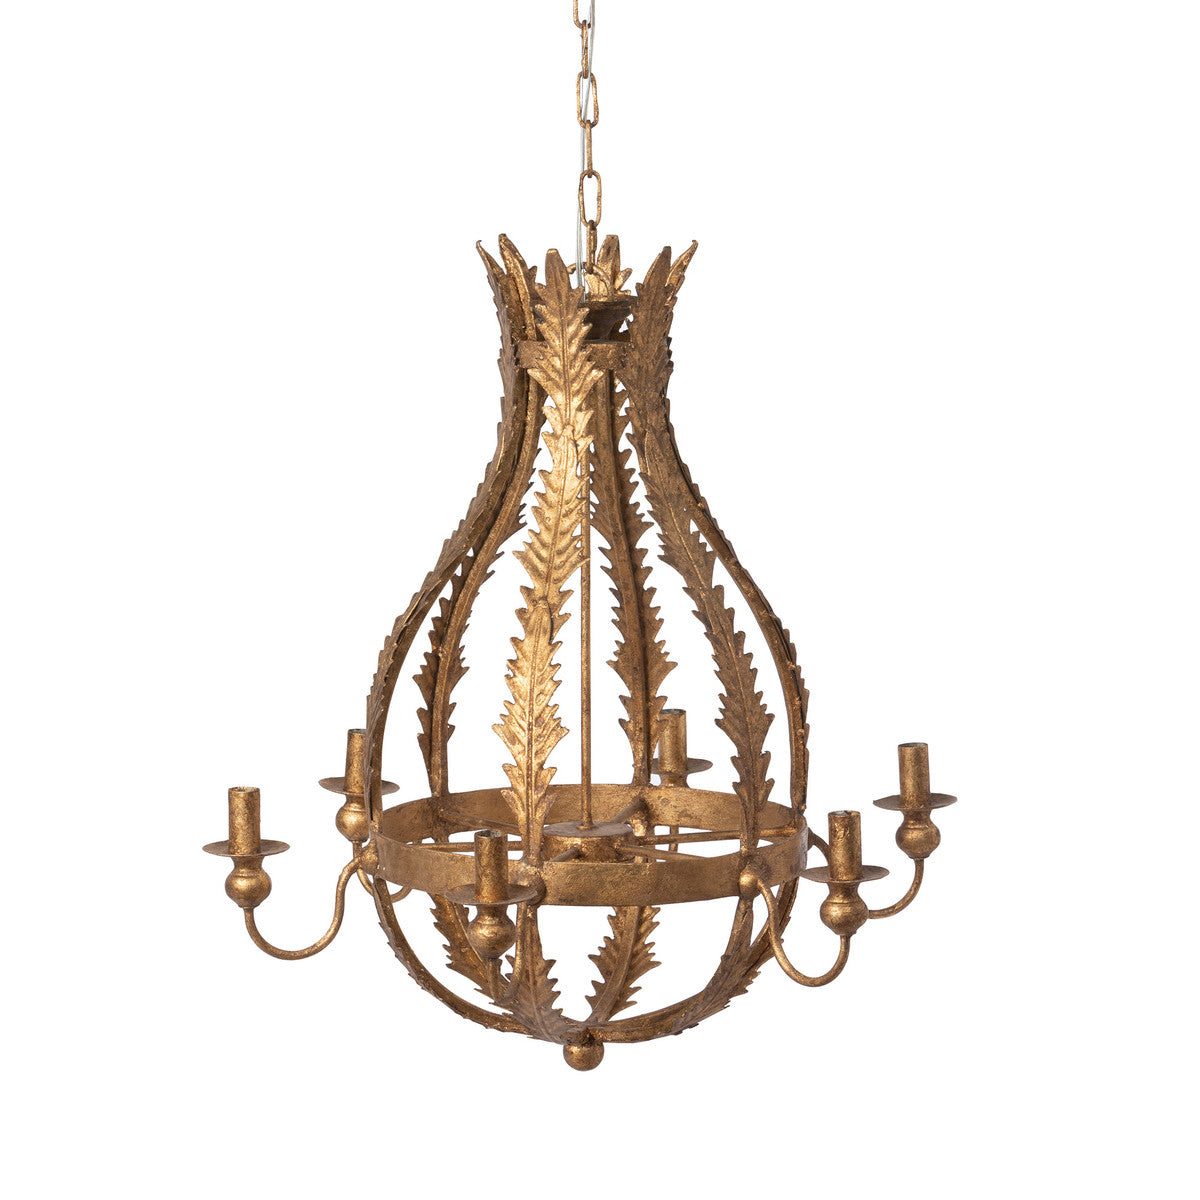 spanish style gold antique chandelier light fixture white background